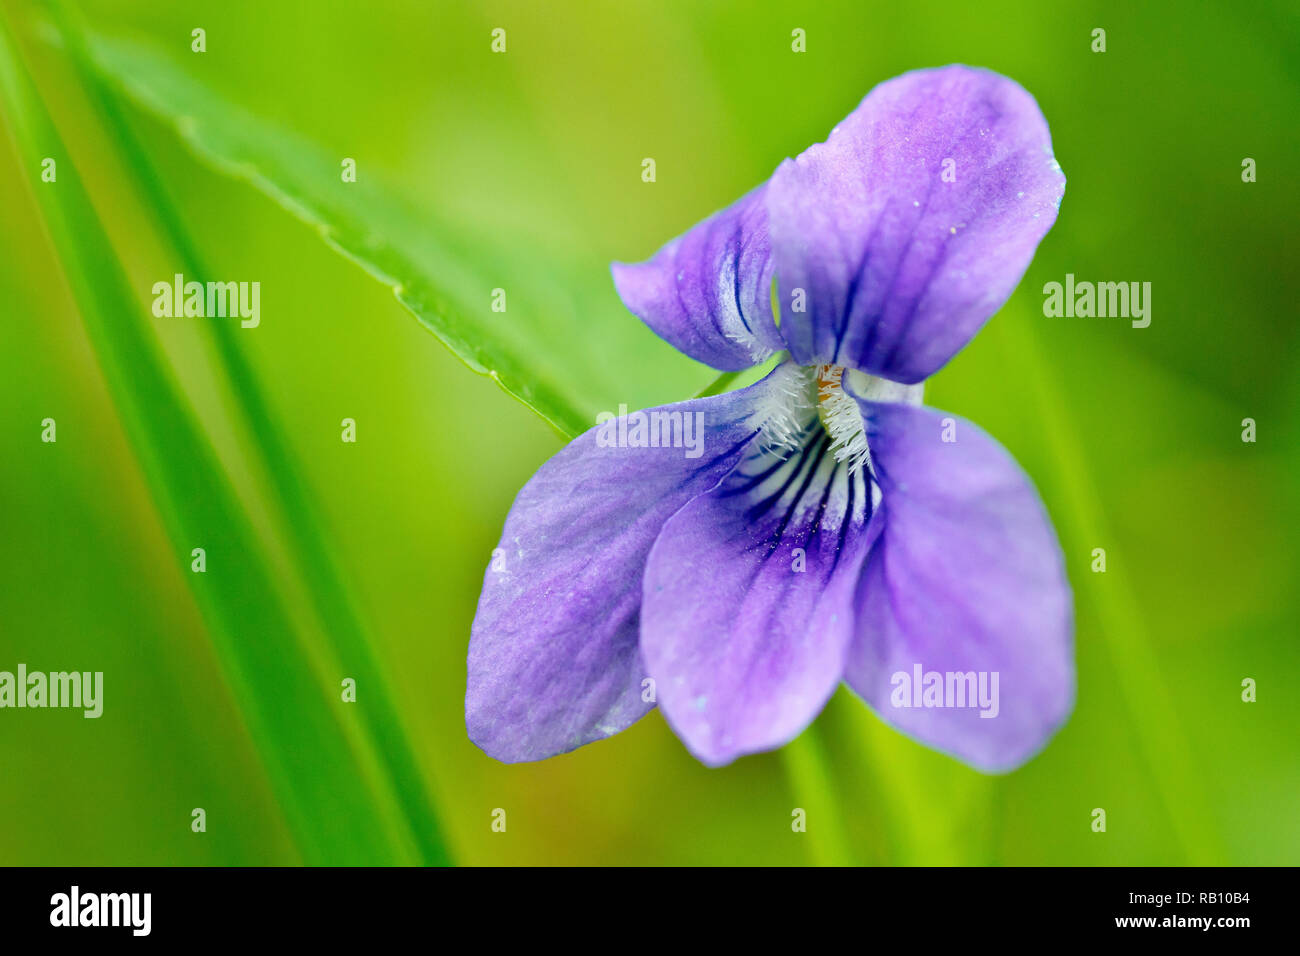 Common Dog-violet (viola riviniana), close up of a solitary flower. Stock Photo